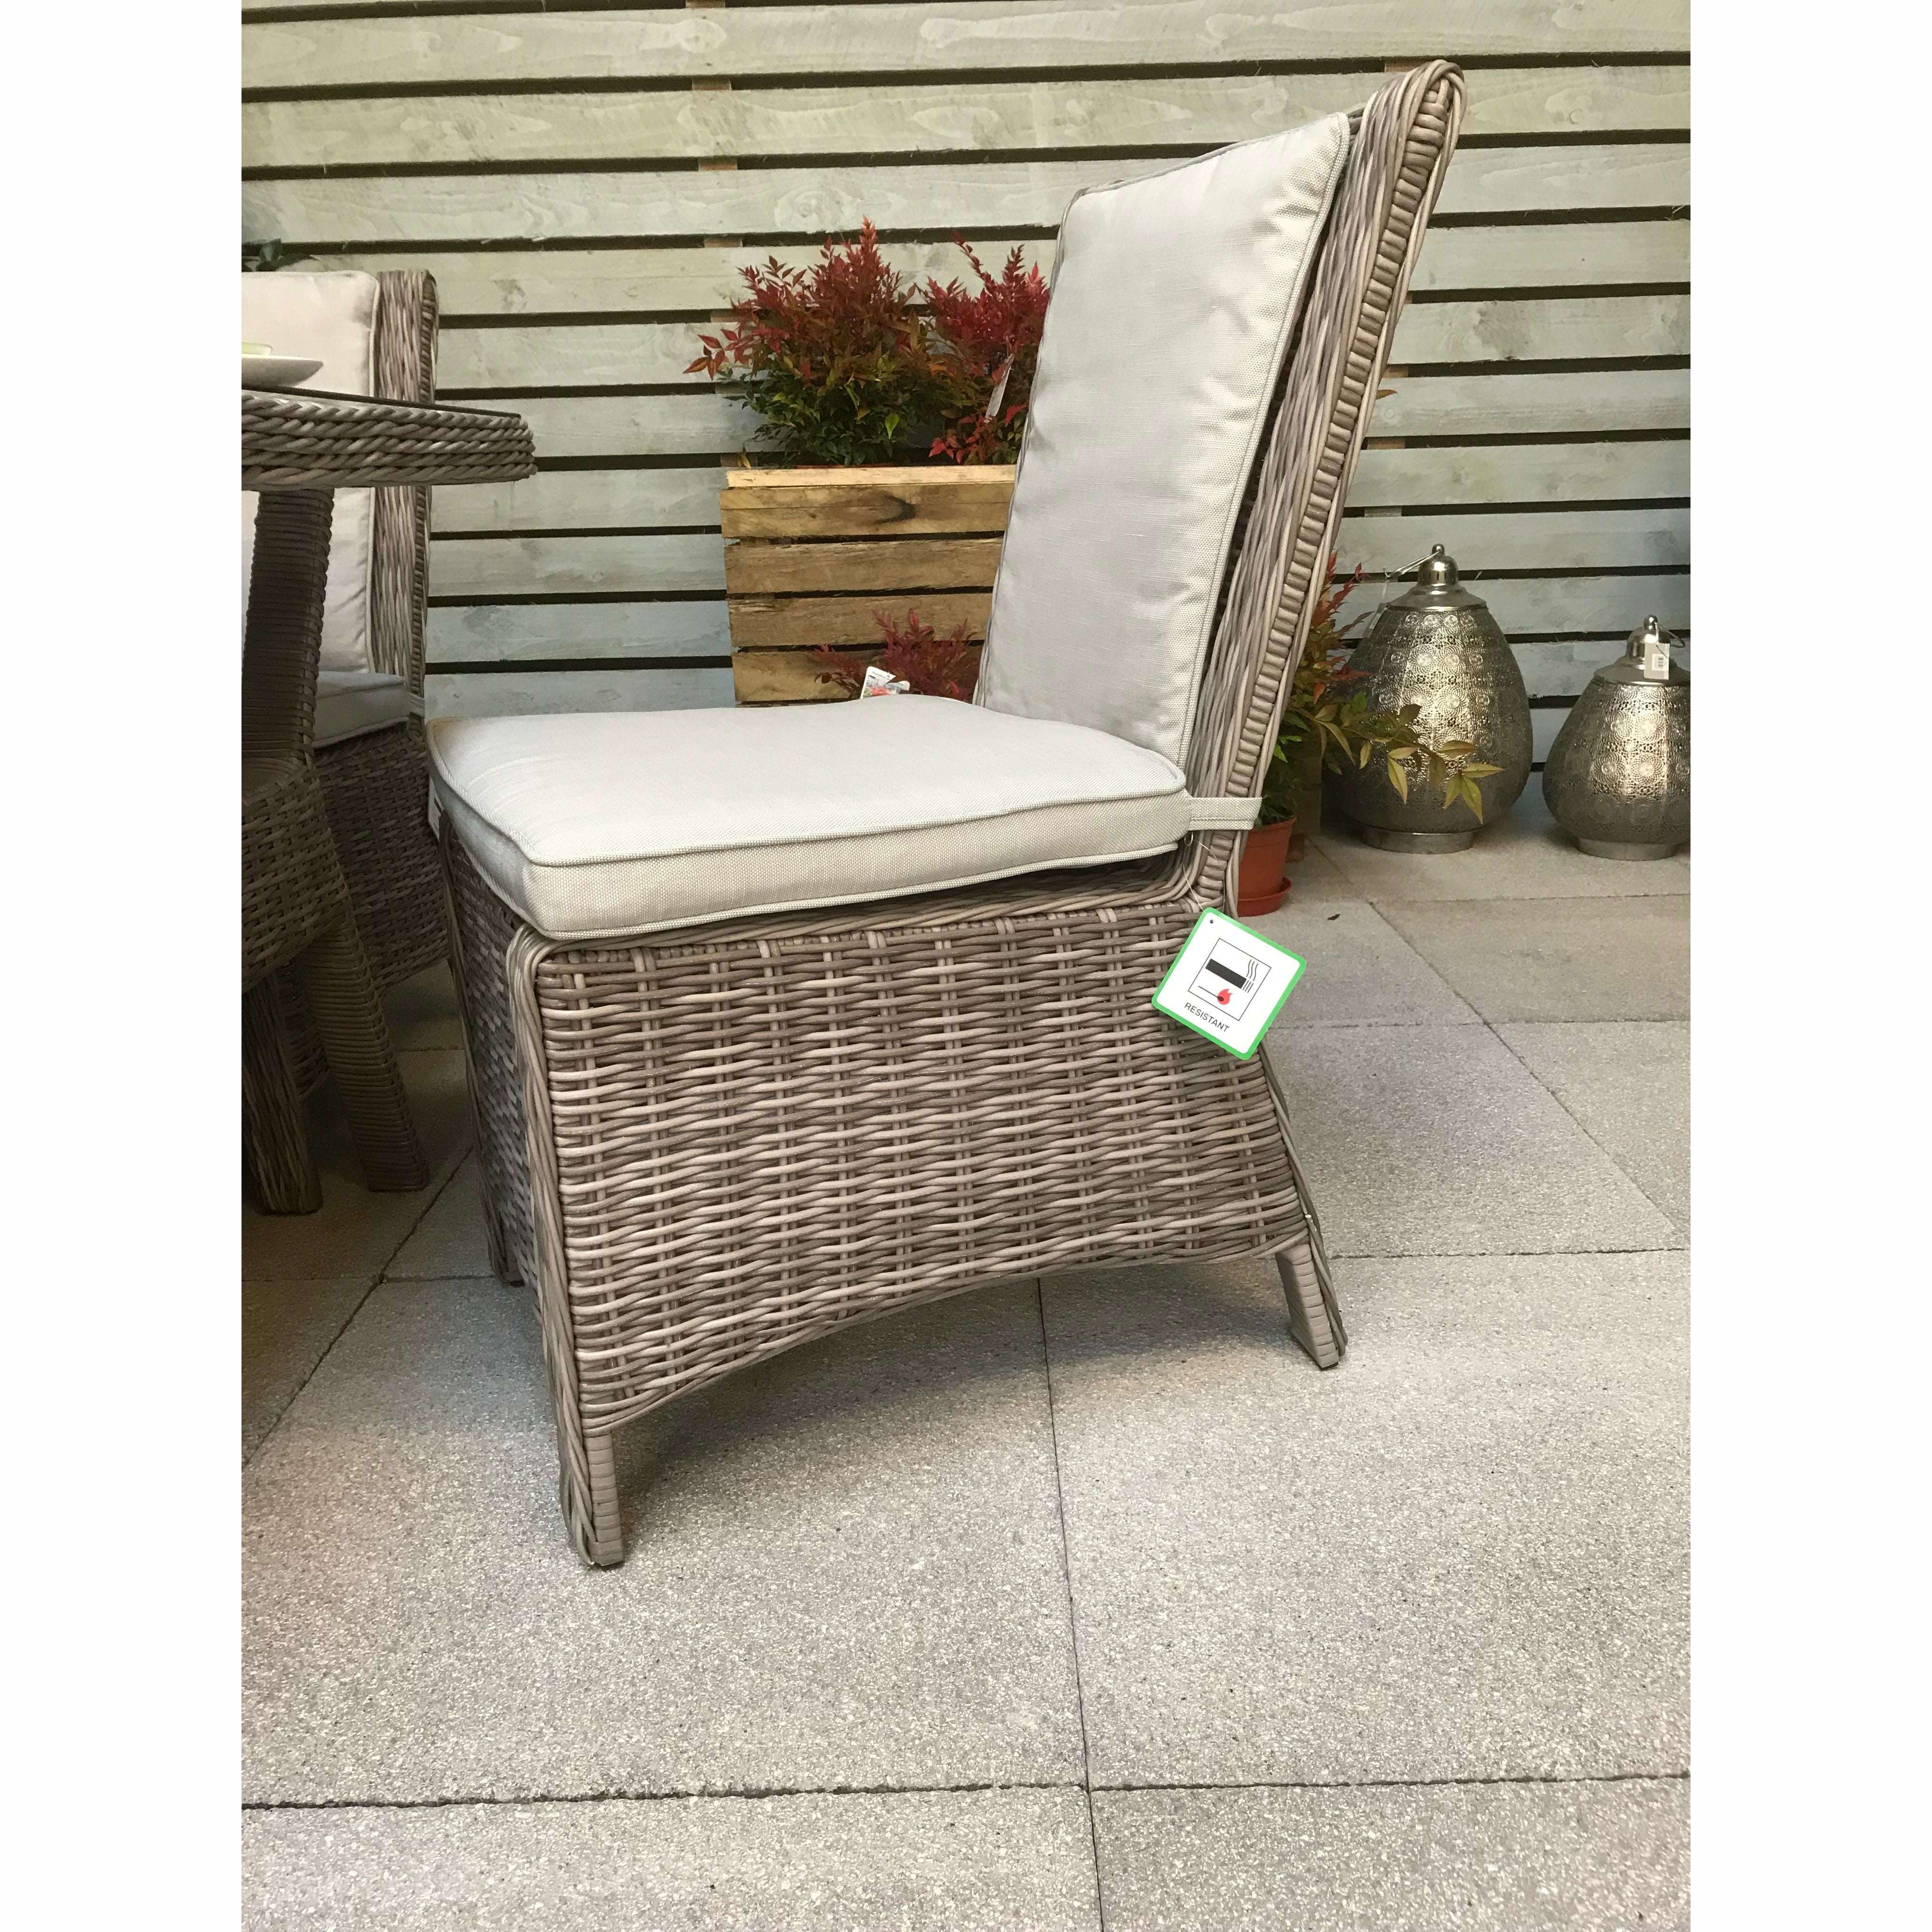 Exceptional Garden:Signature Weave Alexandra High Back Armless Chairs